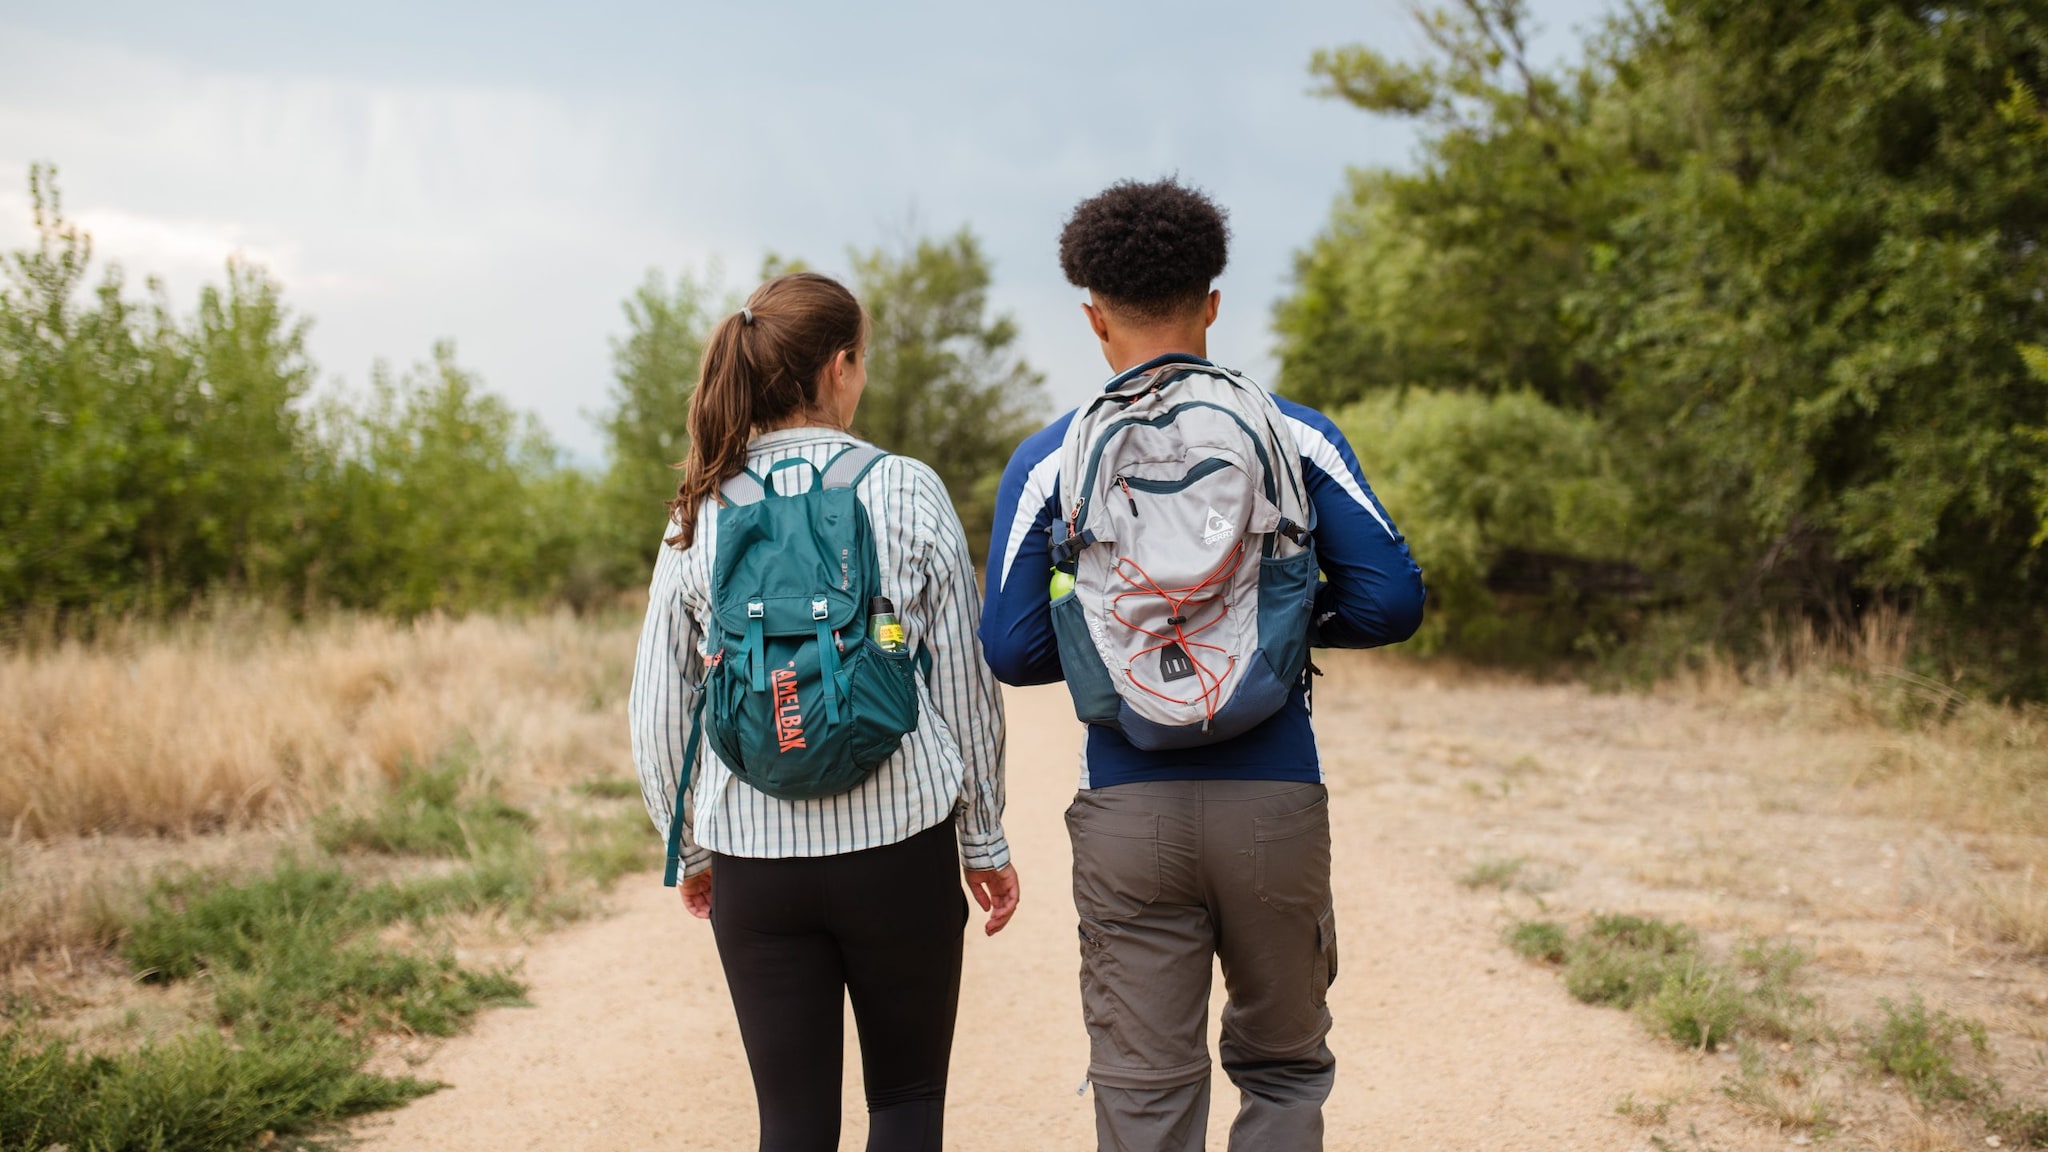 Two people walking on a trial with backpacks on.